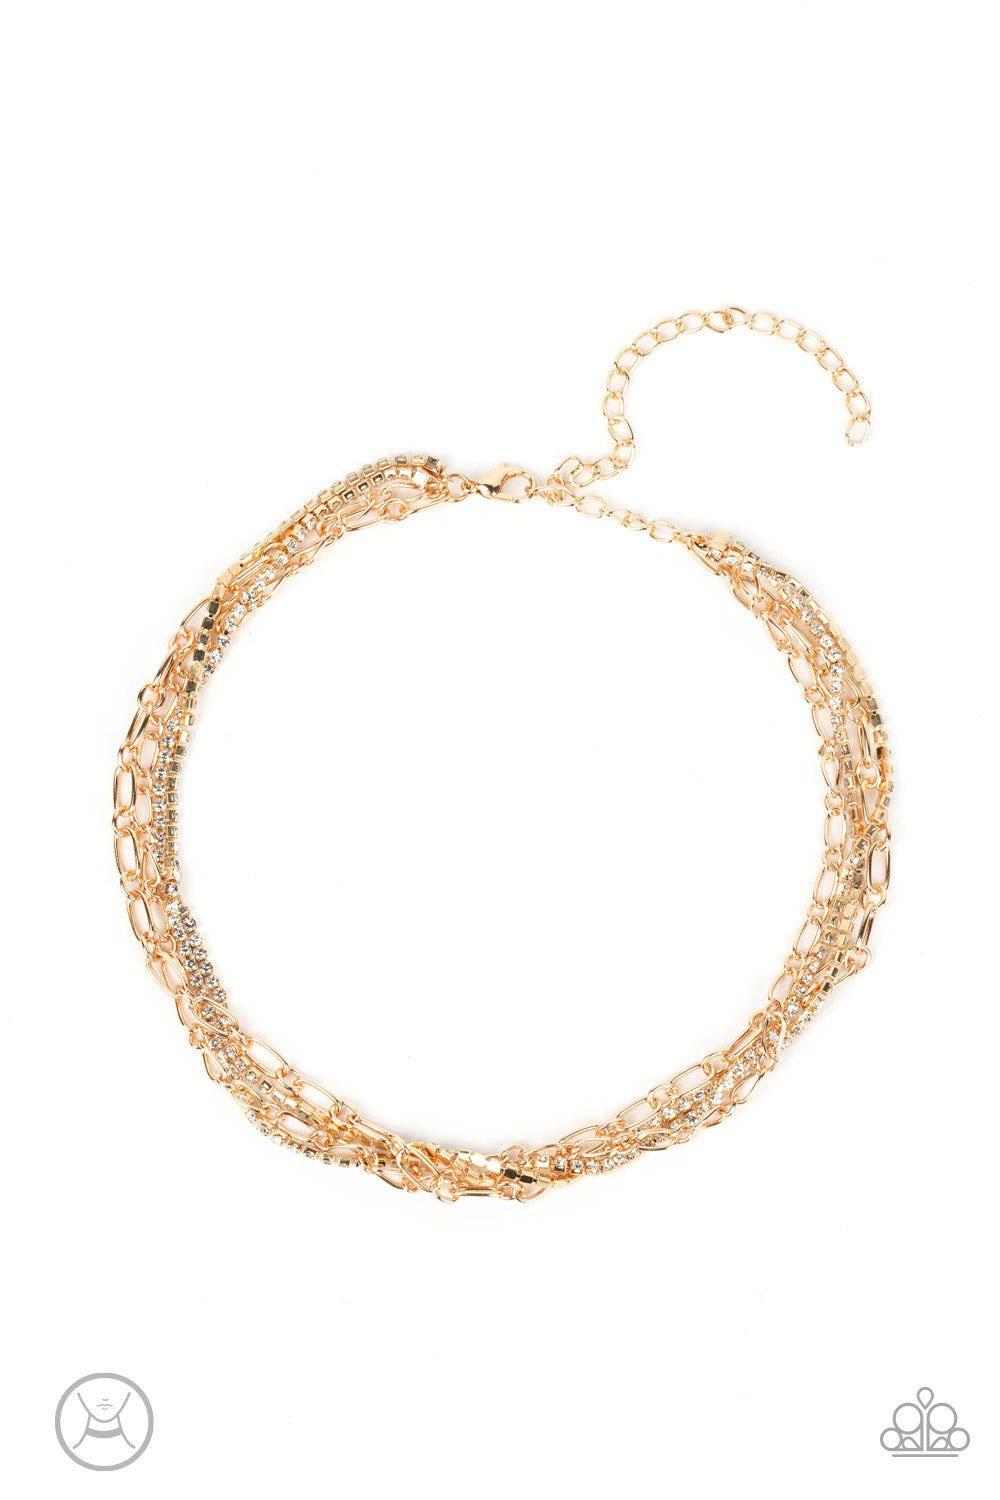 Glitter and Gossip - Gold Choker Necklace - Paparazzi Accessories - Pairs of gold chains and strands of glittery white rhinestones layer around the neck, resulting in stacks of shimmer. Features an adjustable clasp closure. Sold as one individual choker necklace.